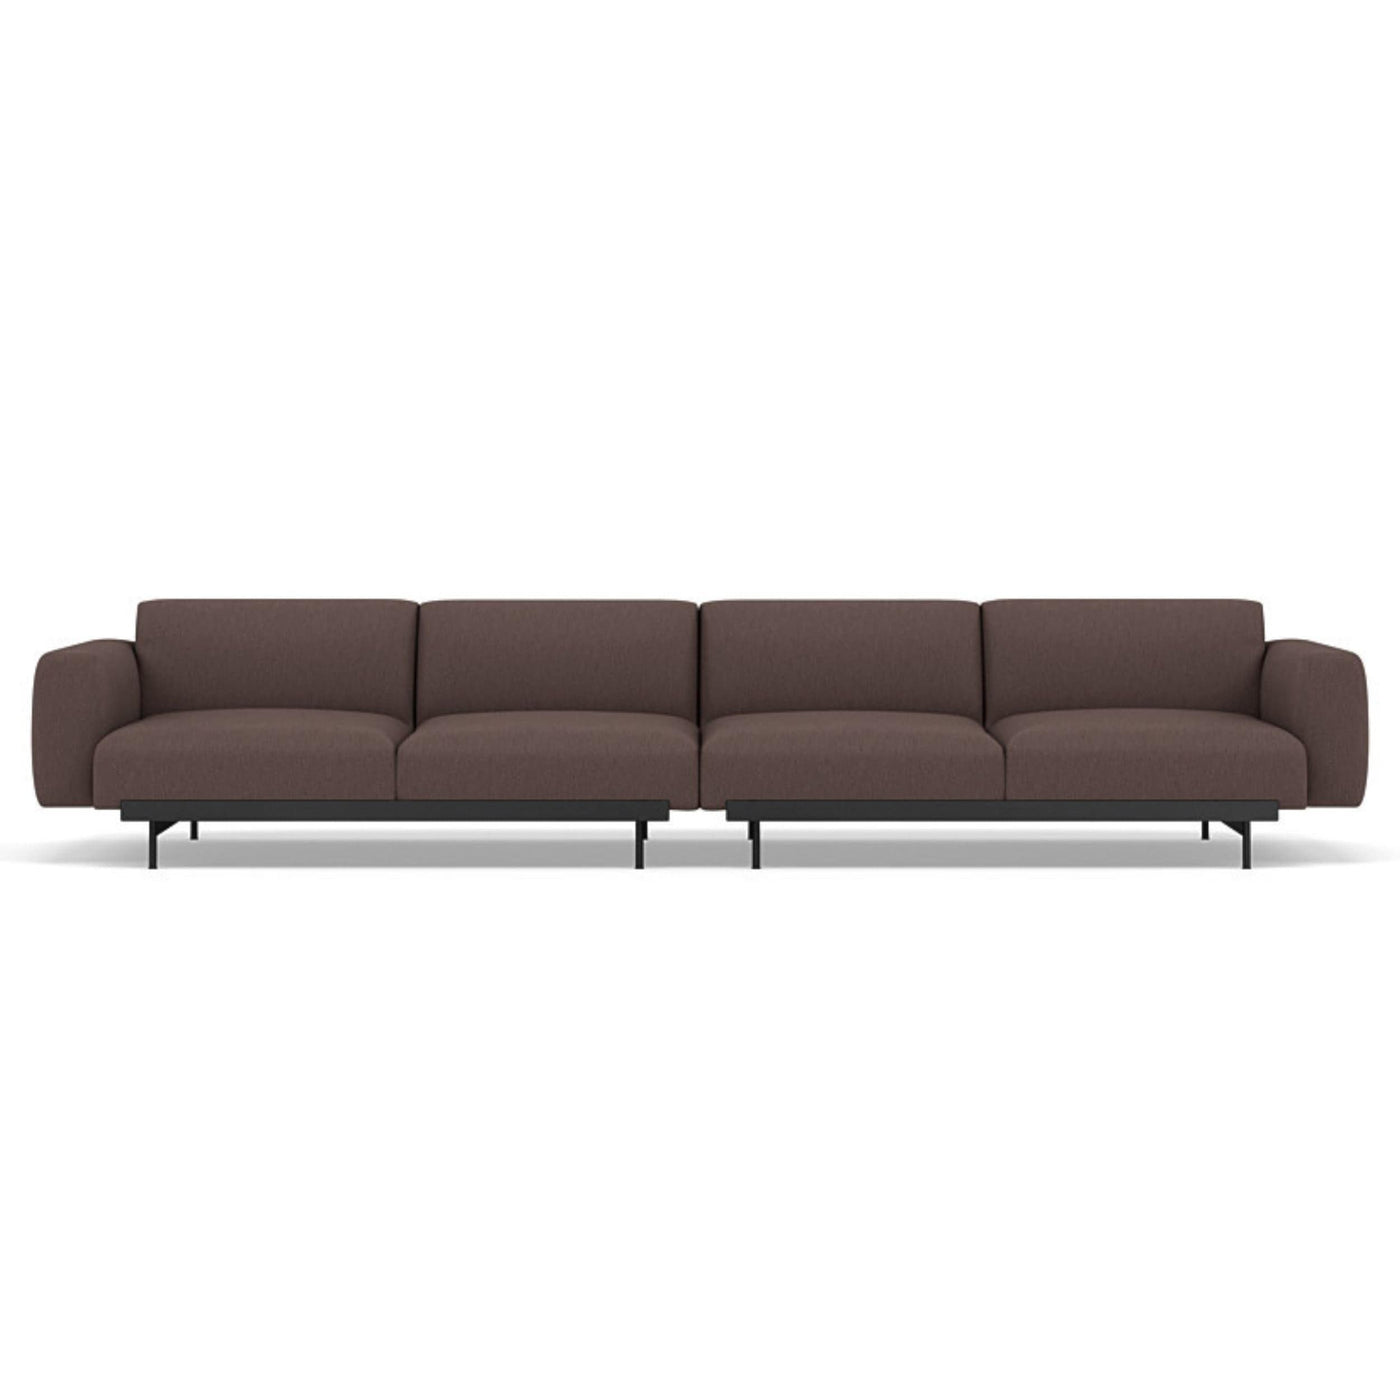 Muuto In Situ Modular 4 Seater Sofa configuration in clay 6. Made to order from someday designs. #colour_clay-6-red-brown